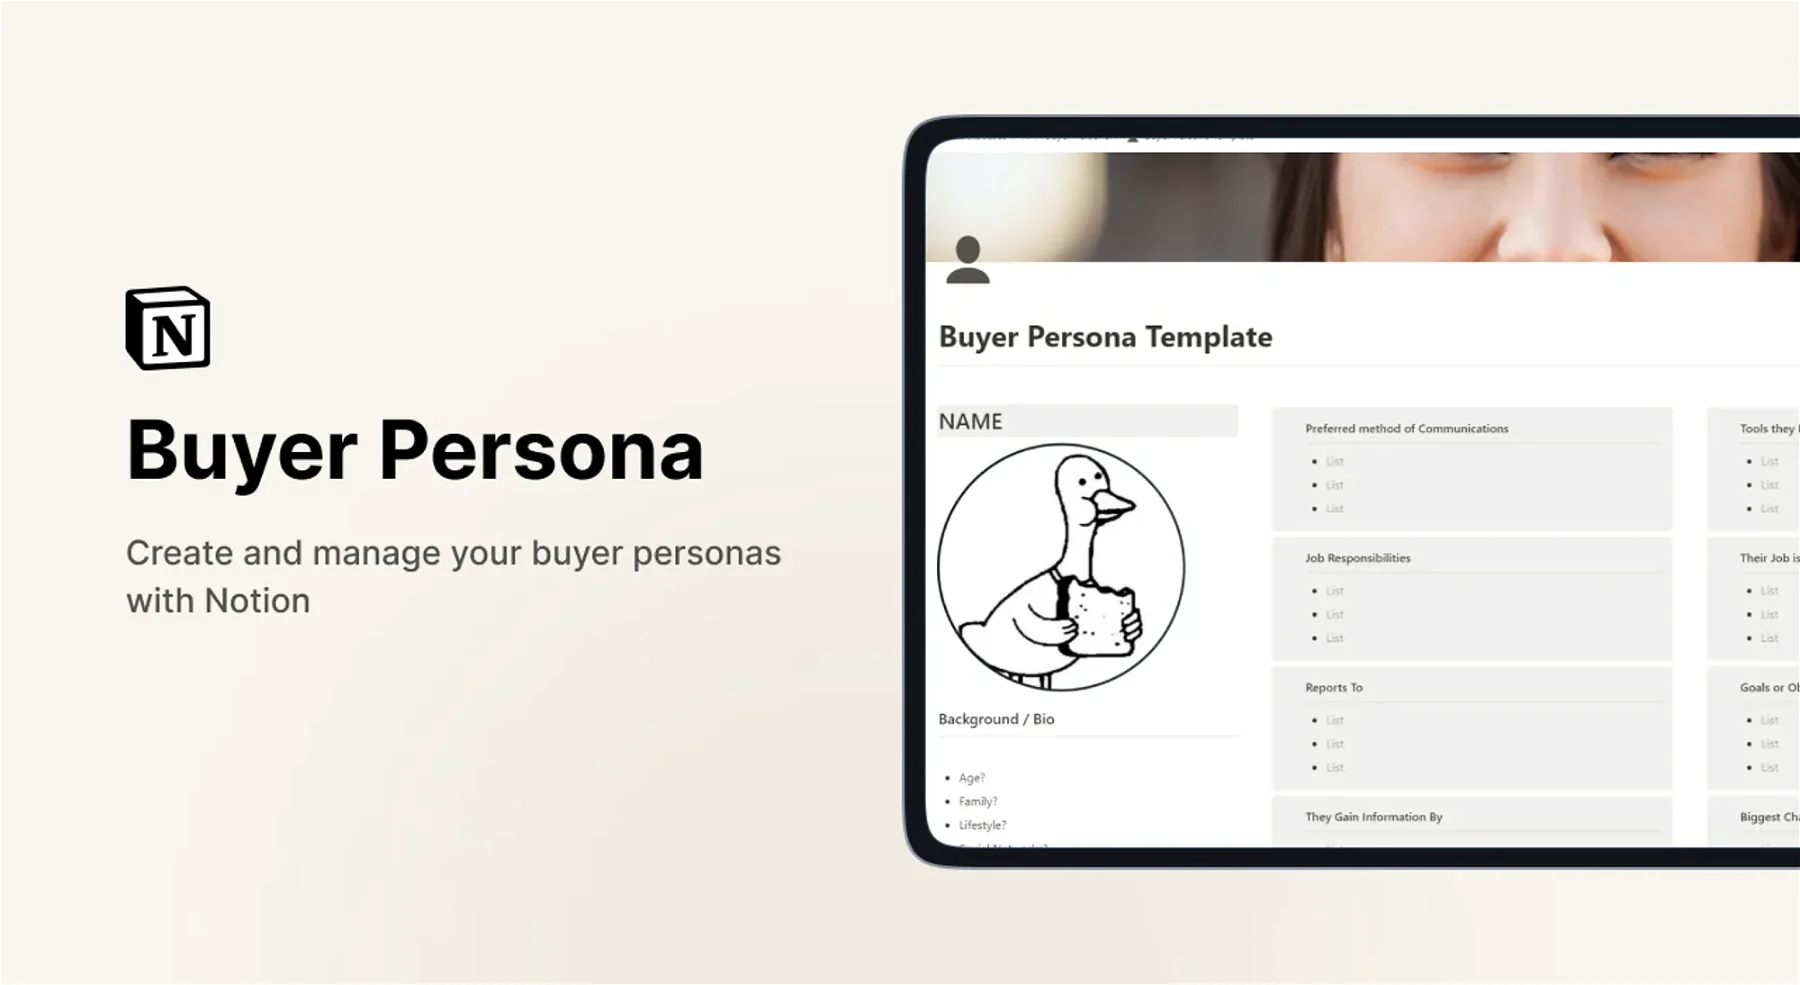 Buyer Persona Template in Notion